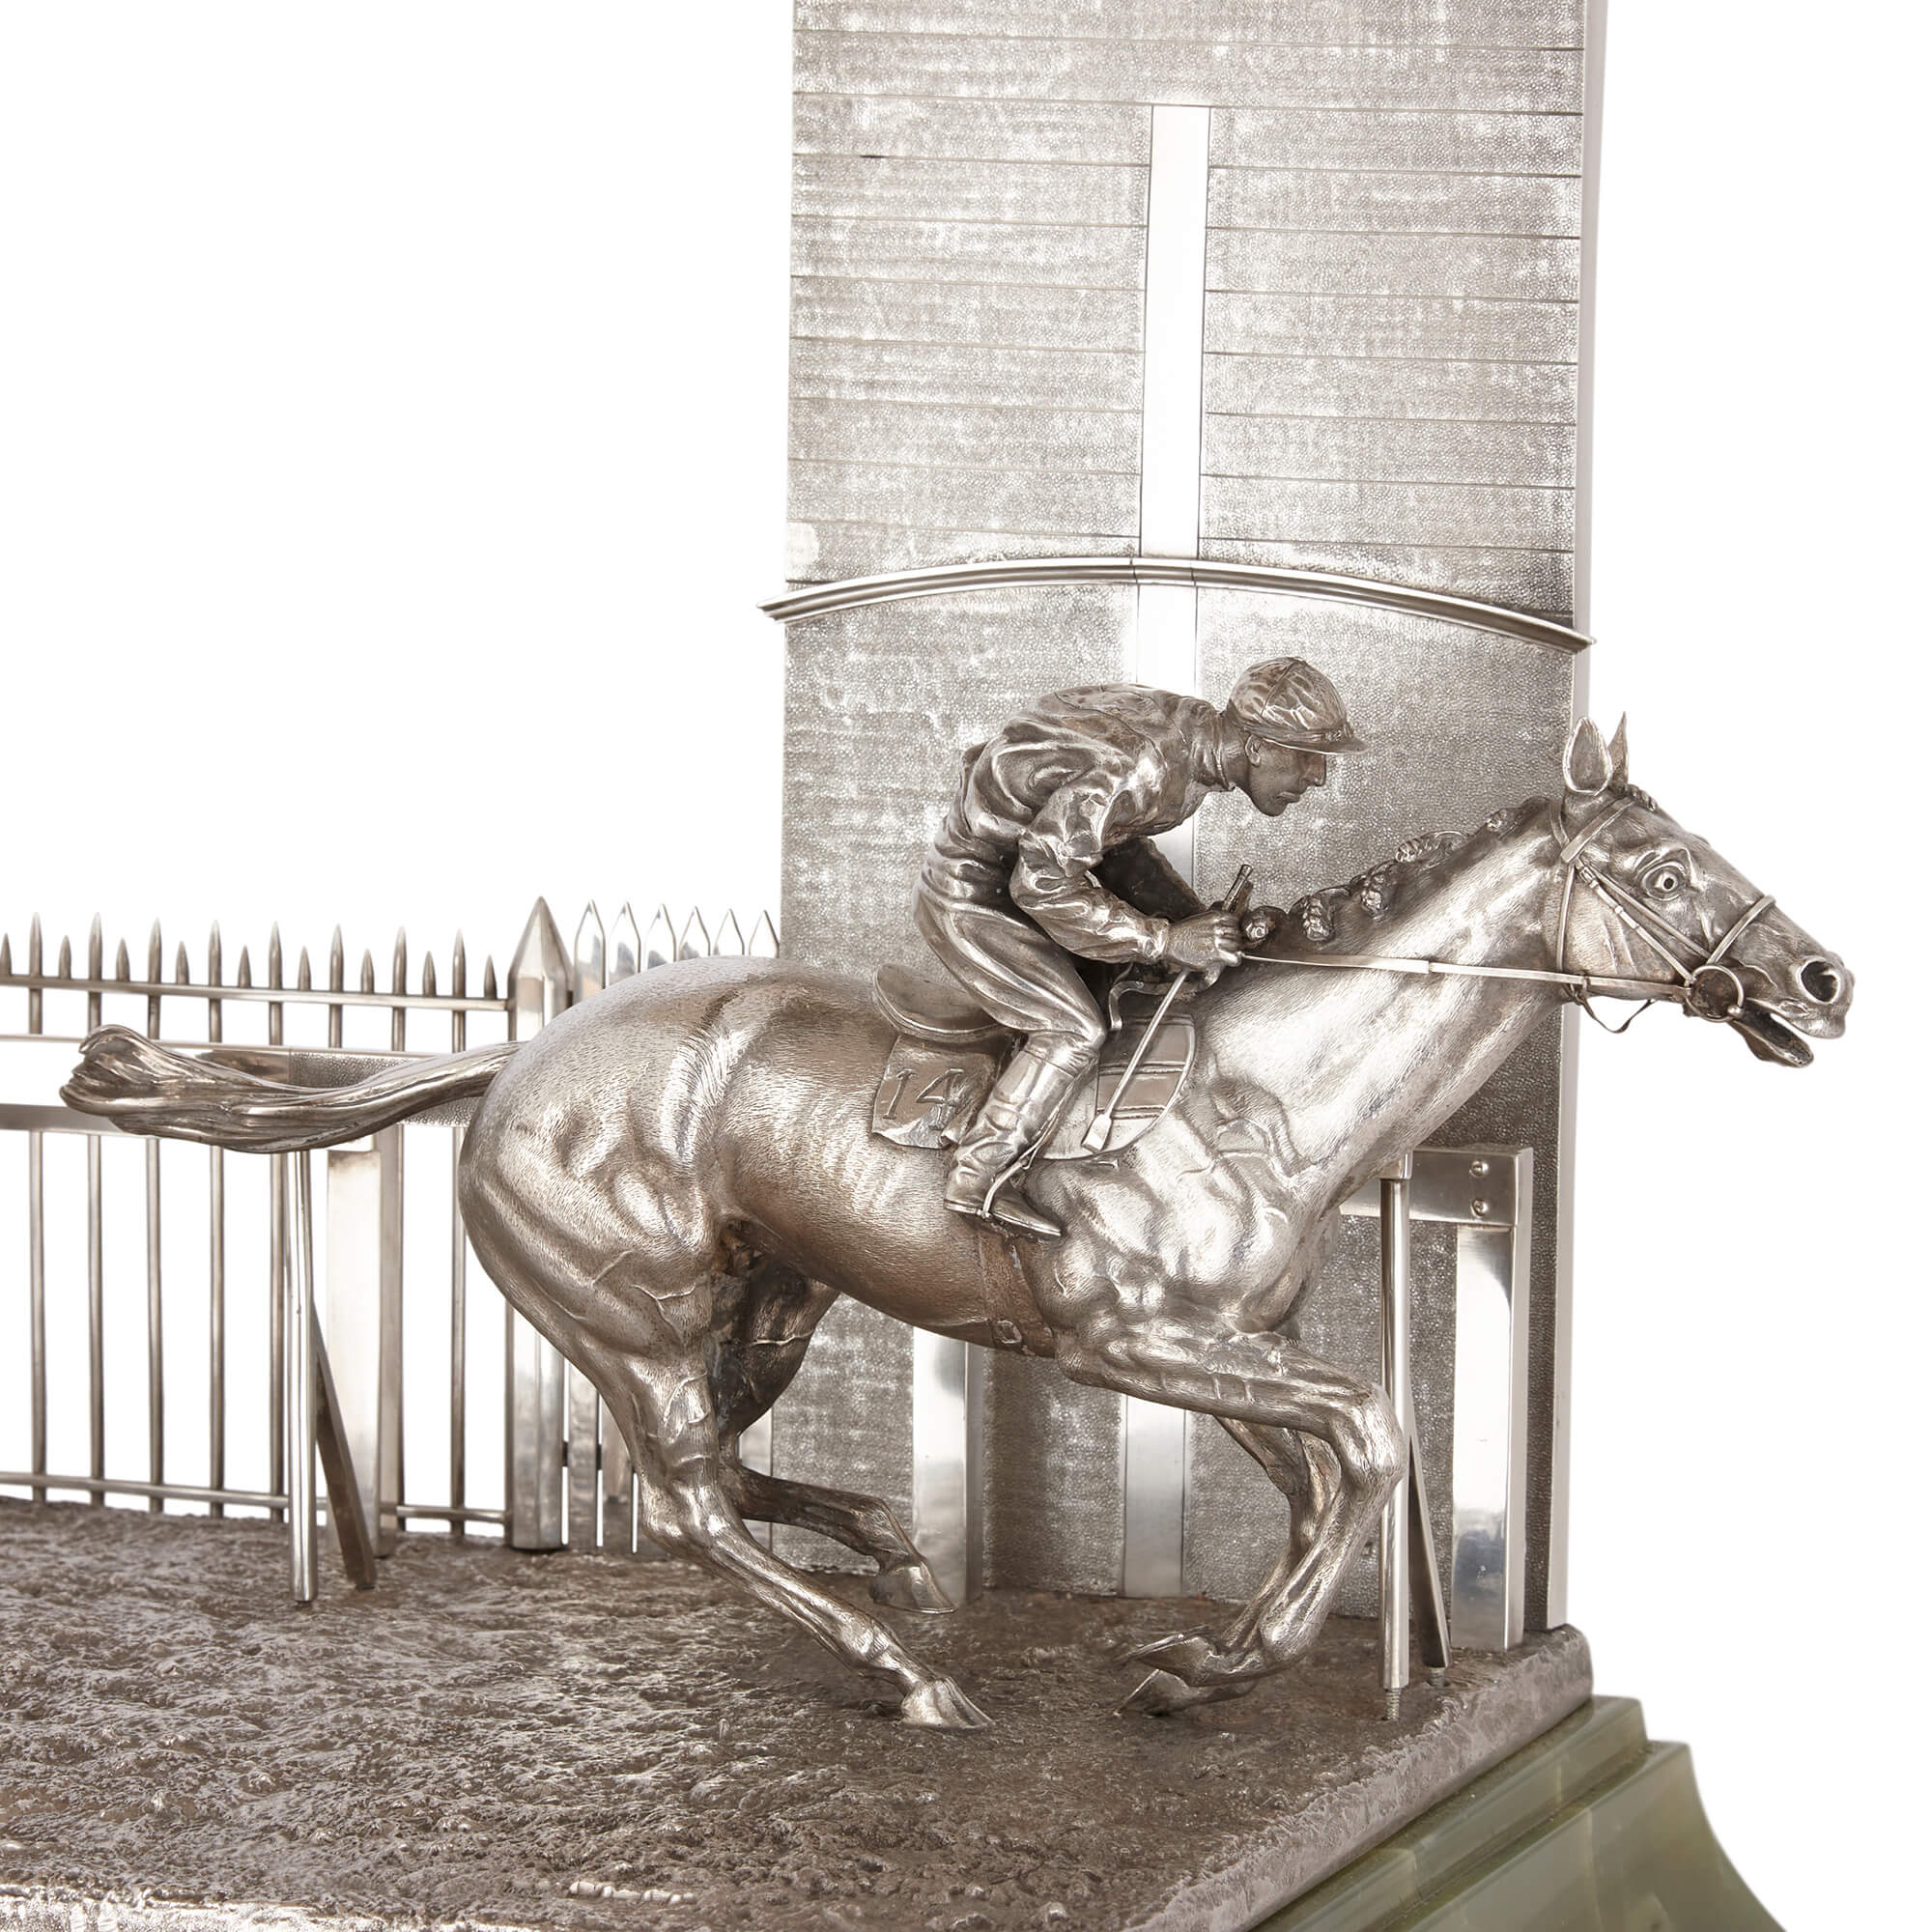 Silver and onyx horse racing sculpture for the Maharaja of